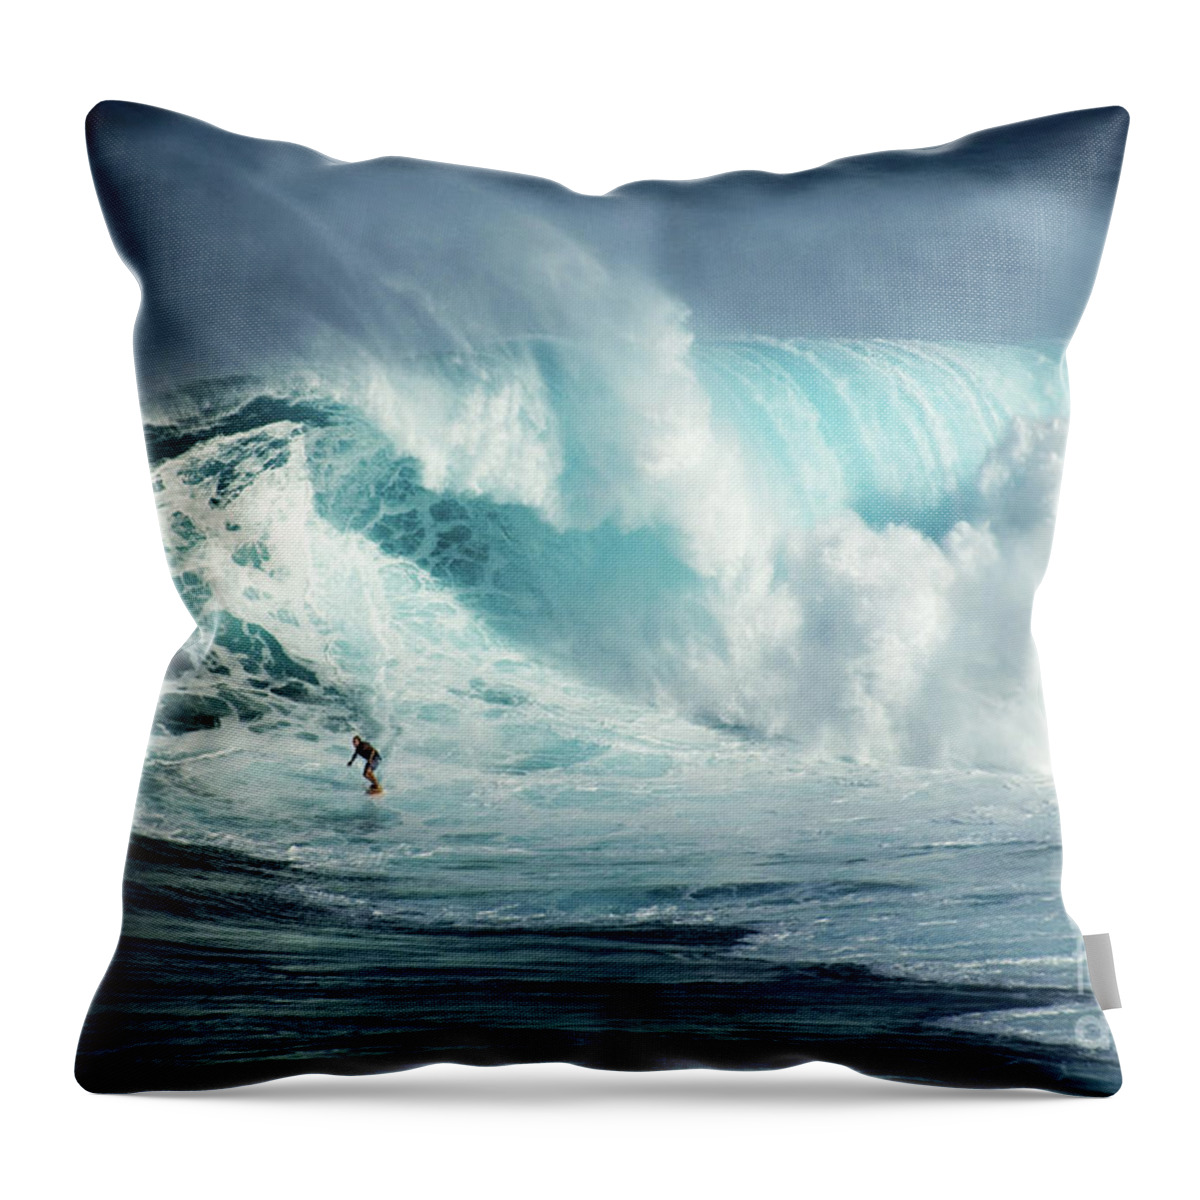 Surf Throw Pillow featuring the photograph Hawaii Surfing Jaws 1 by Bob Christopher